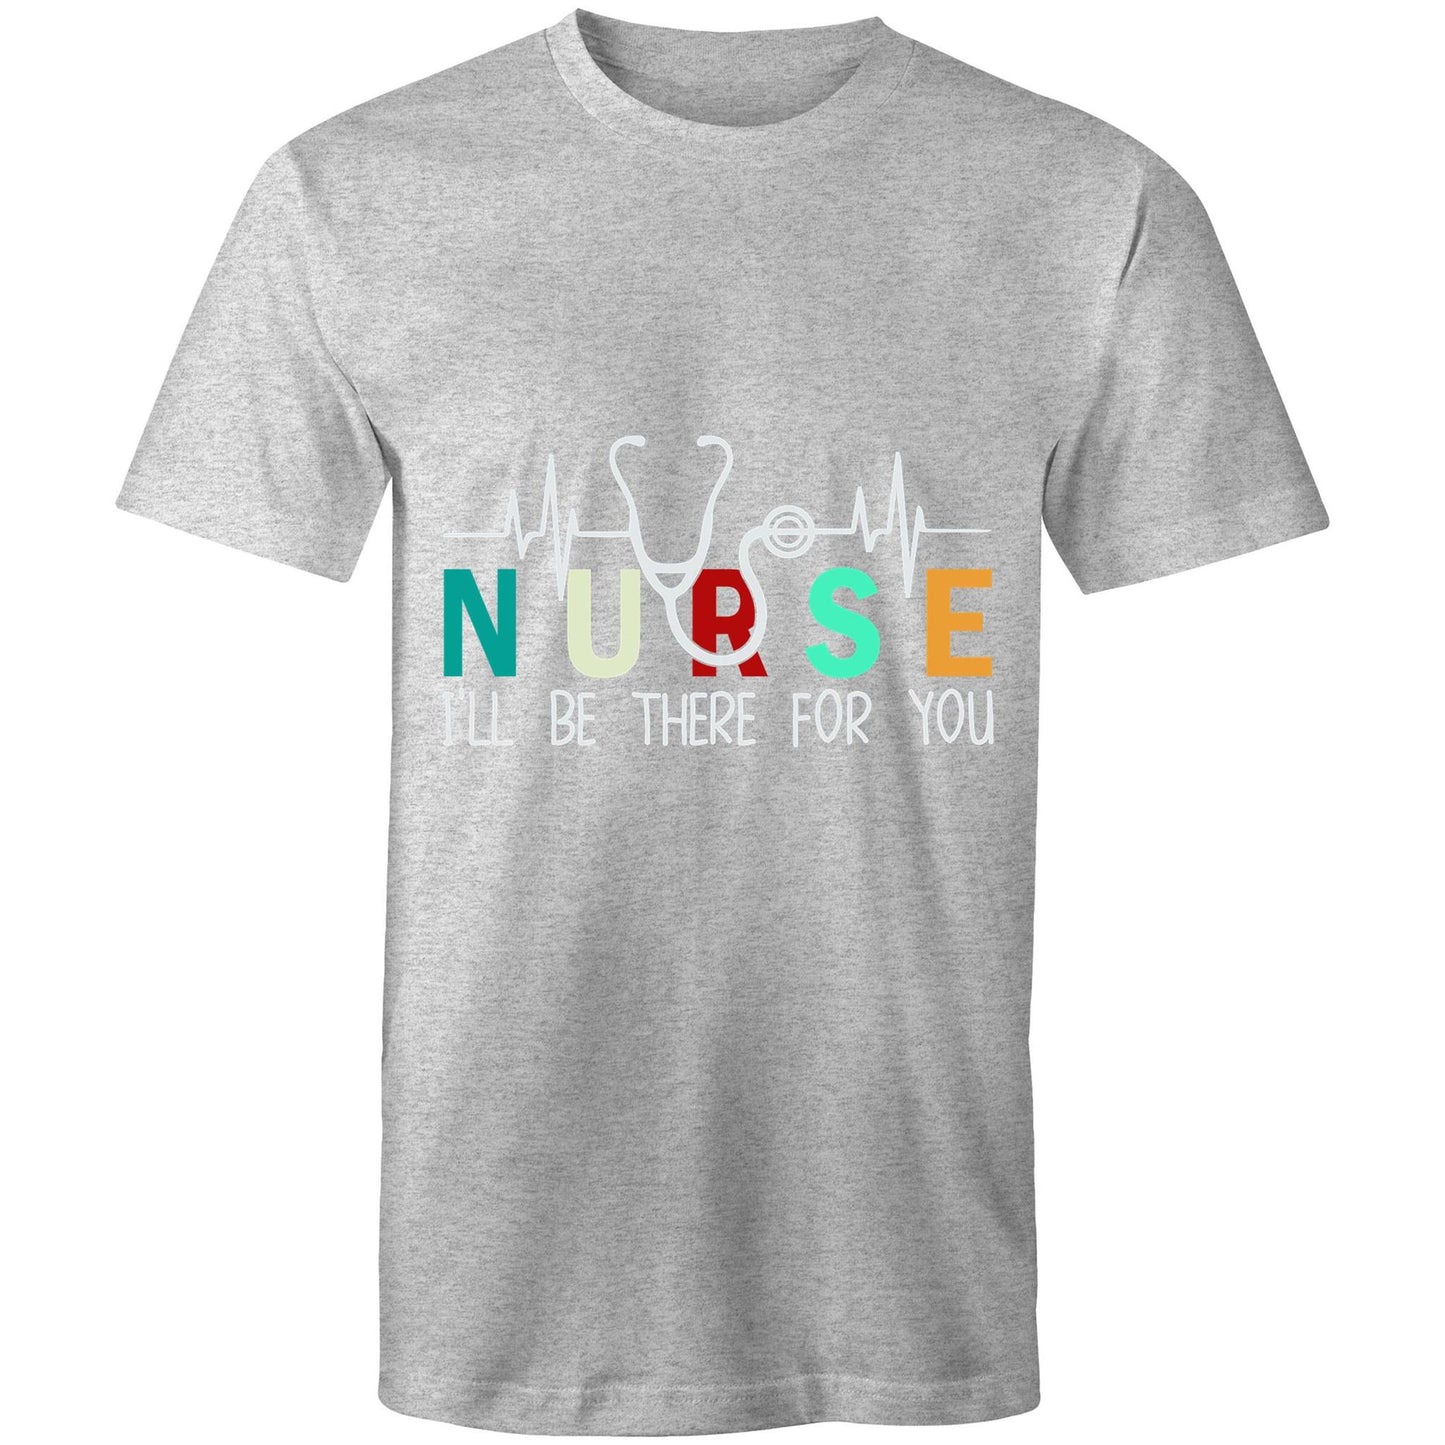 I’ll be There for You NurseMens T-Shirt